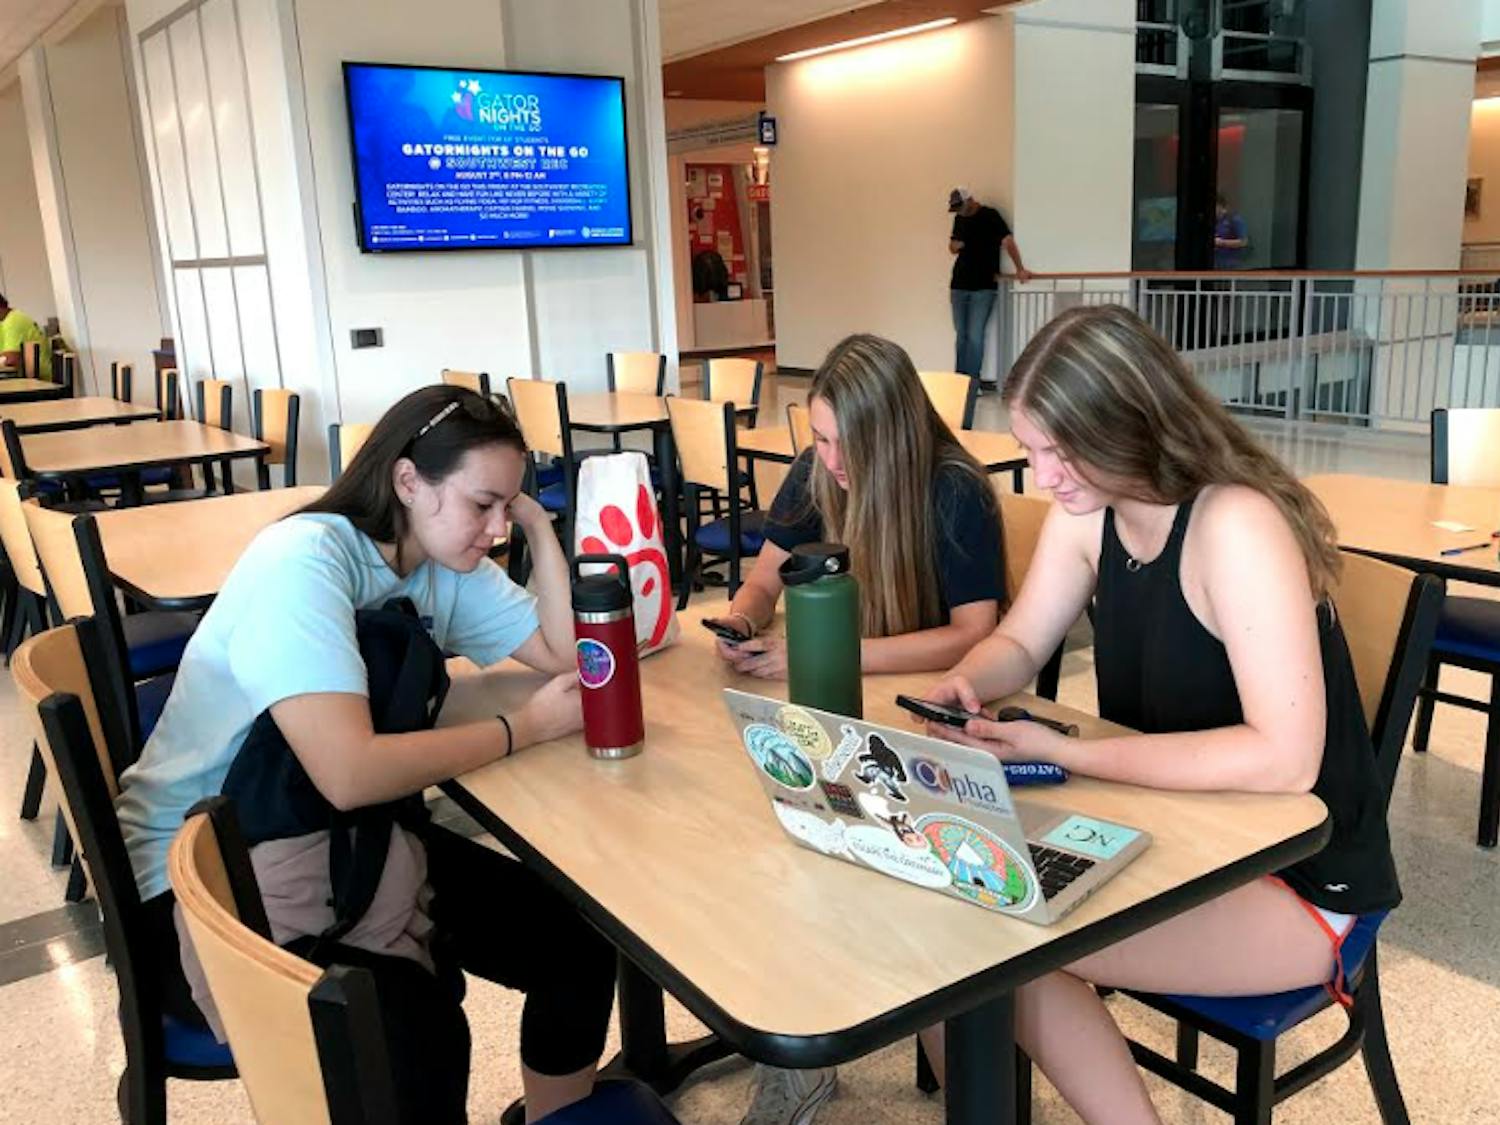 




Isabella Vasquez, 18, Holly Kappes, 18, and Madison Grove, 18, check their social media accounts at the Reitz Union. All are incoming freshman.




